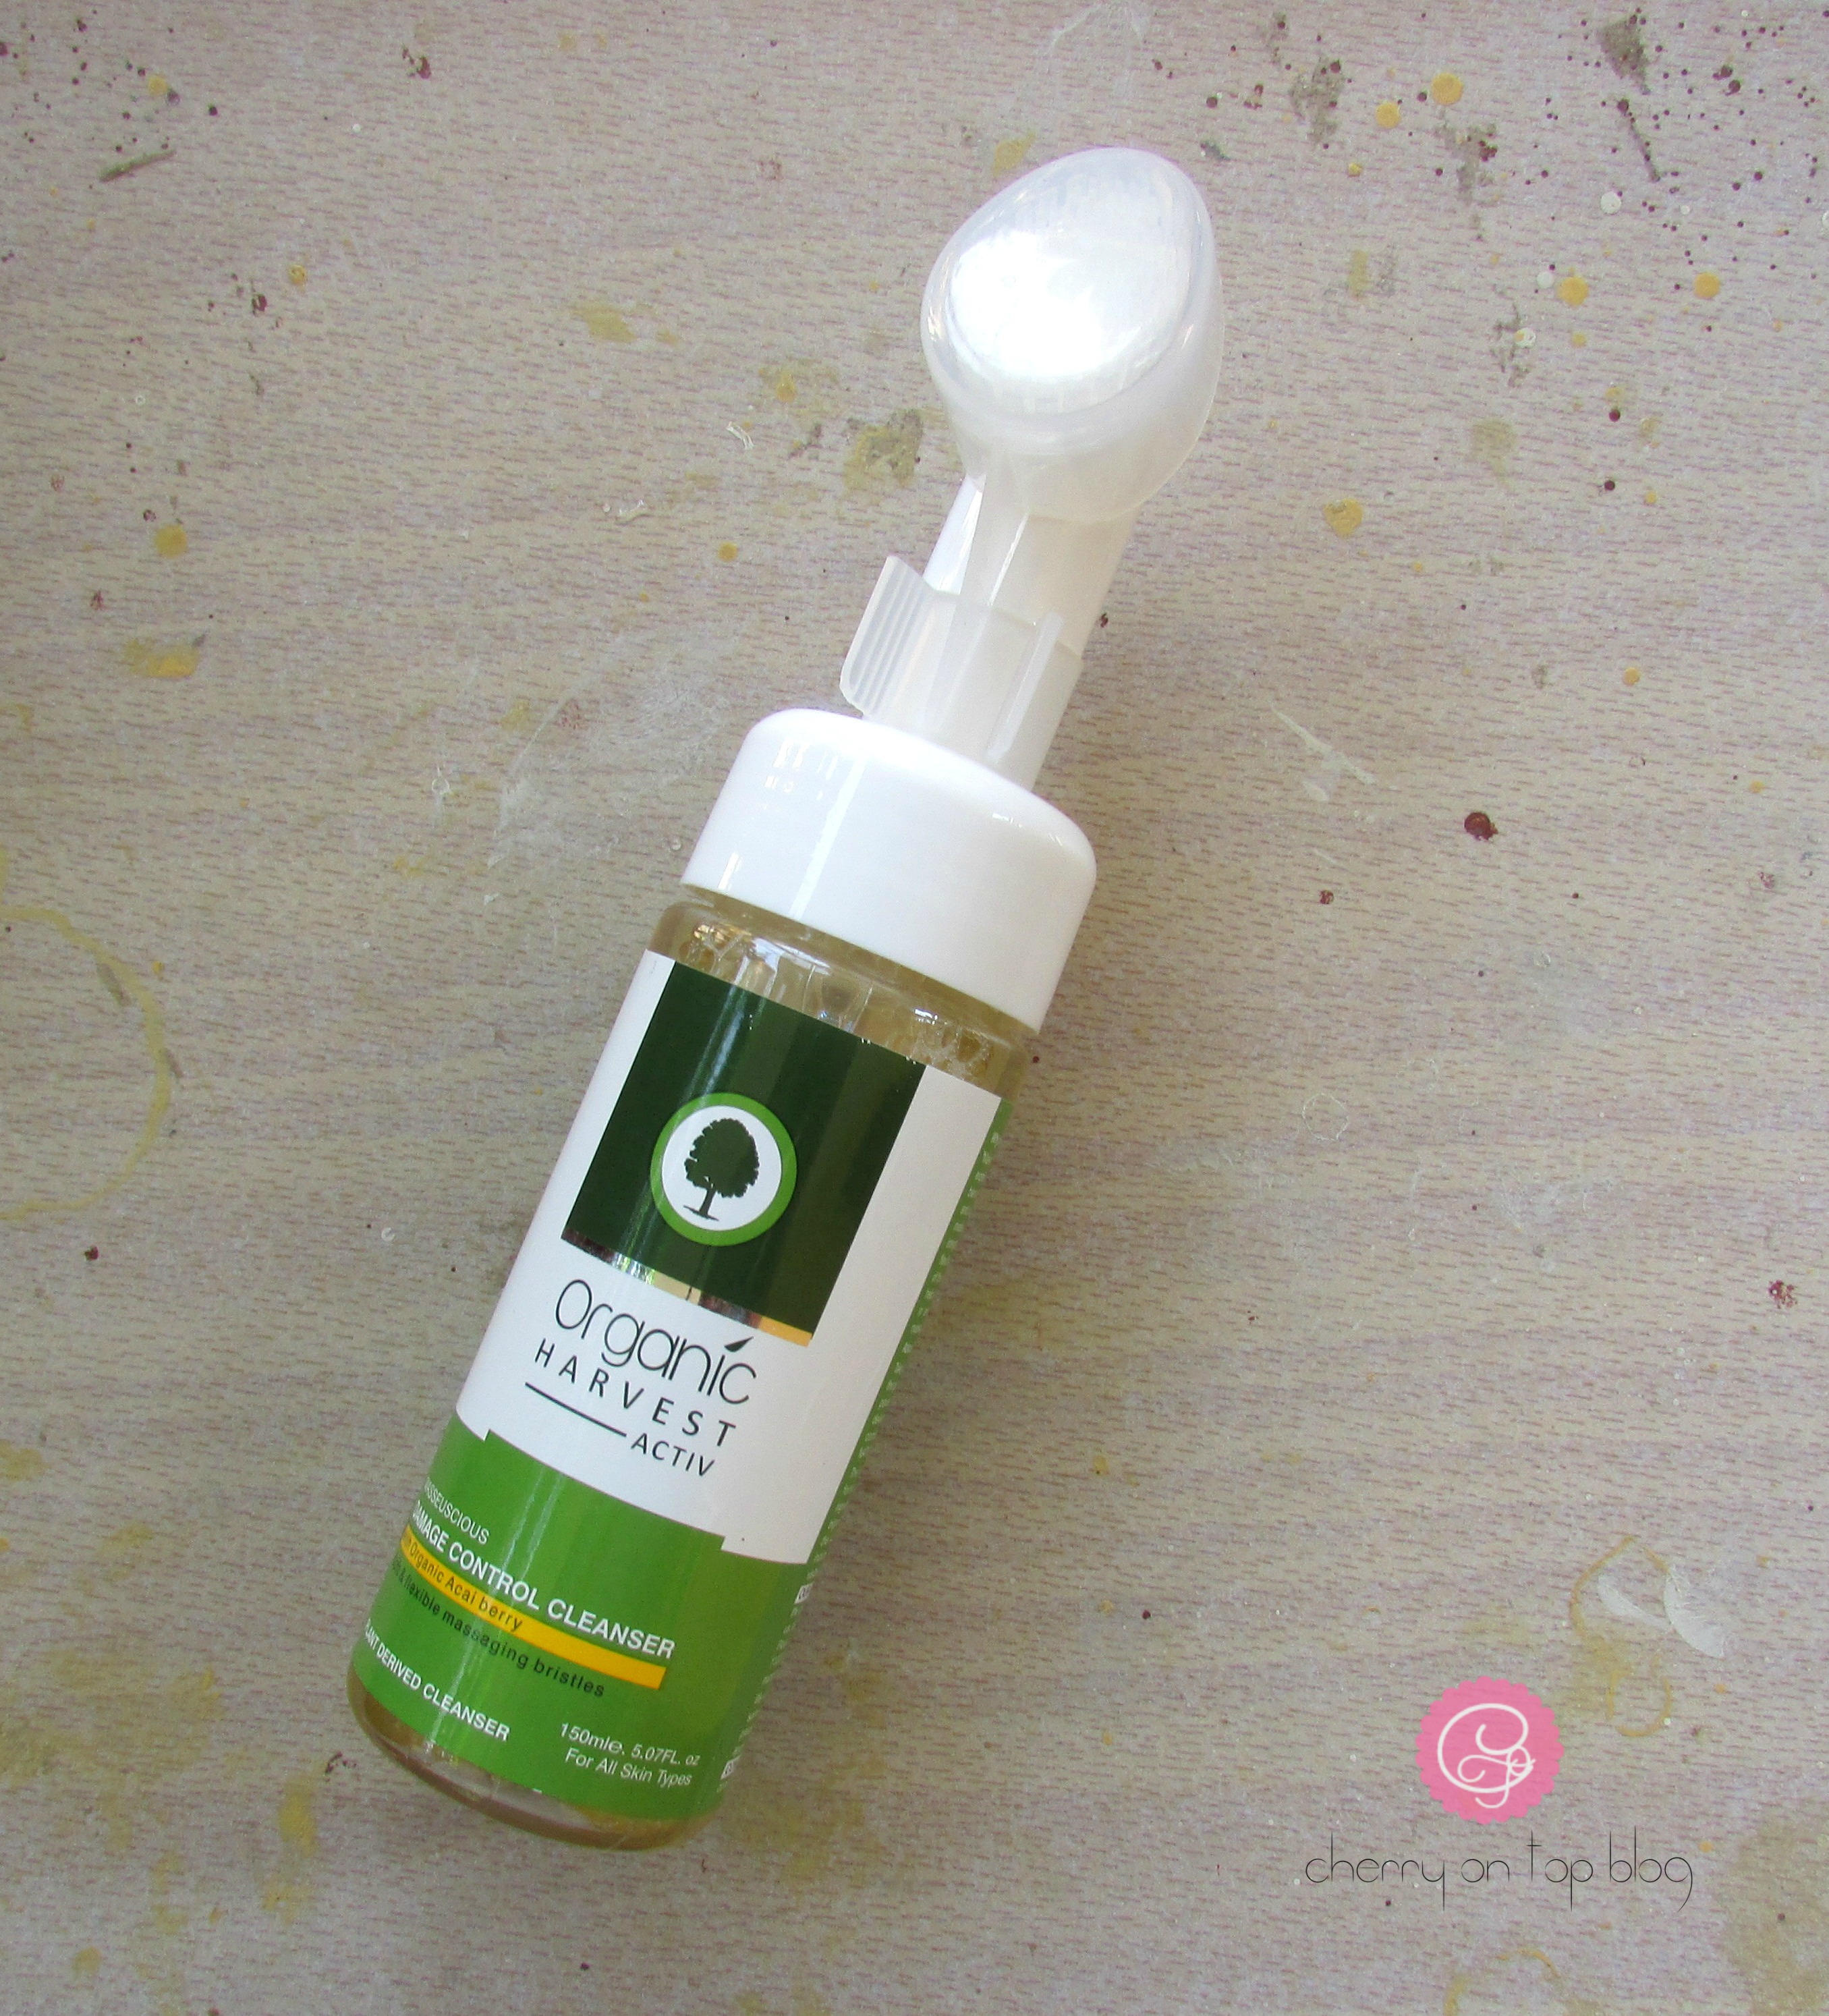 Organic Harvest Masseuscious Damage Control Cleanser Review| Cherry On Top